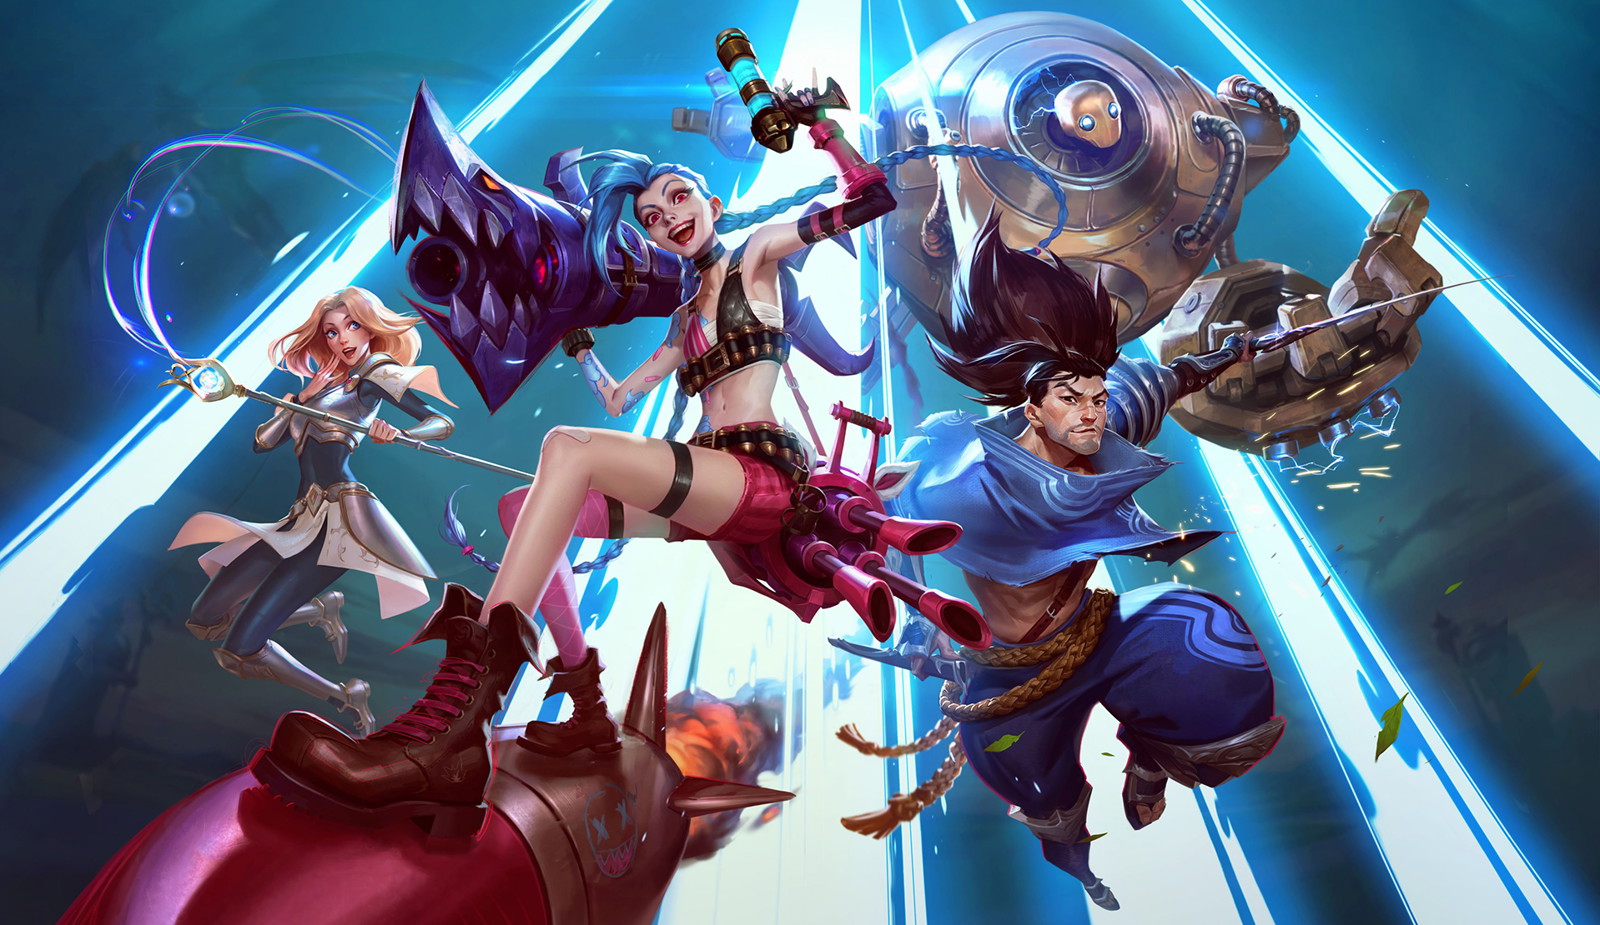 League of Legends is a Joe Tung produced live-service game which has become a worldwide phenomenon.